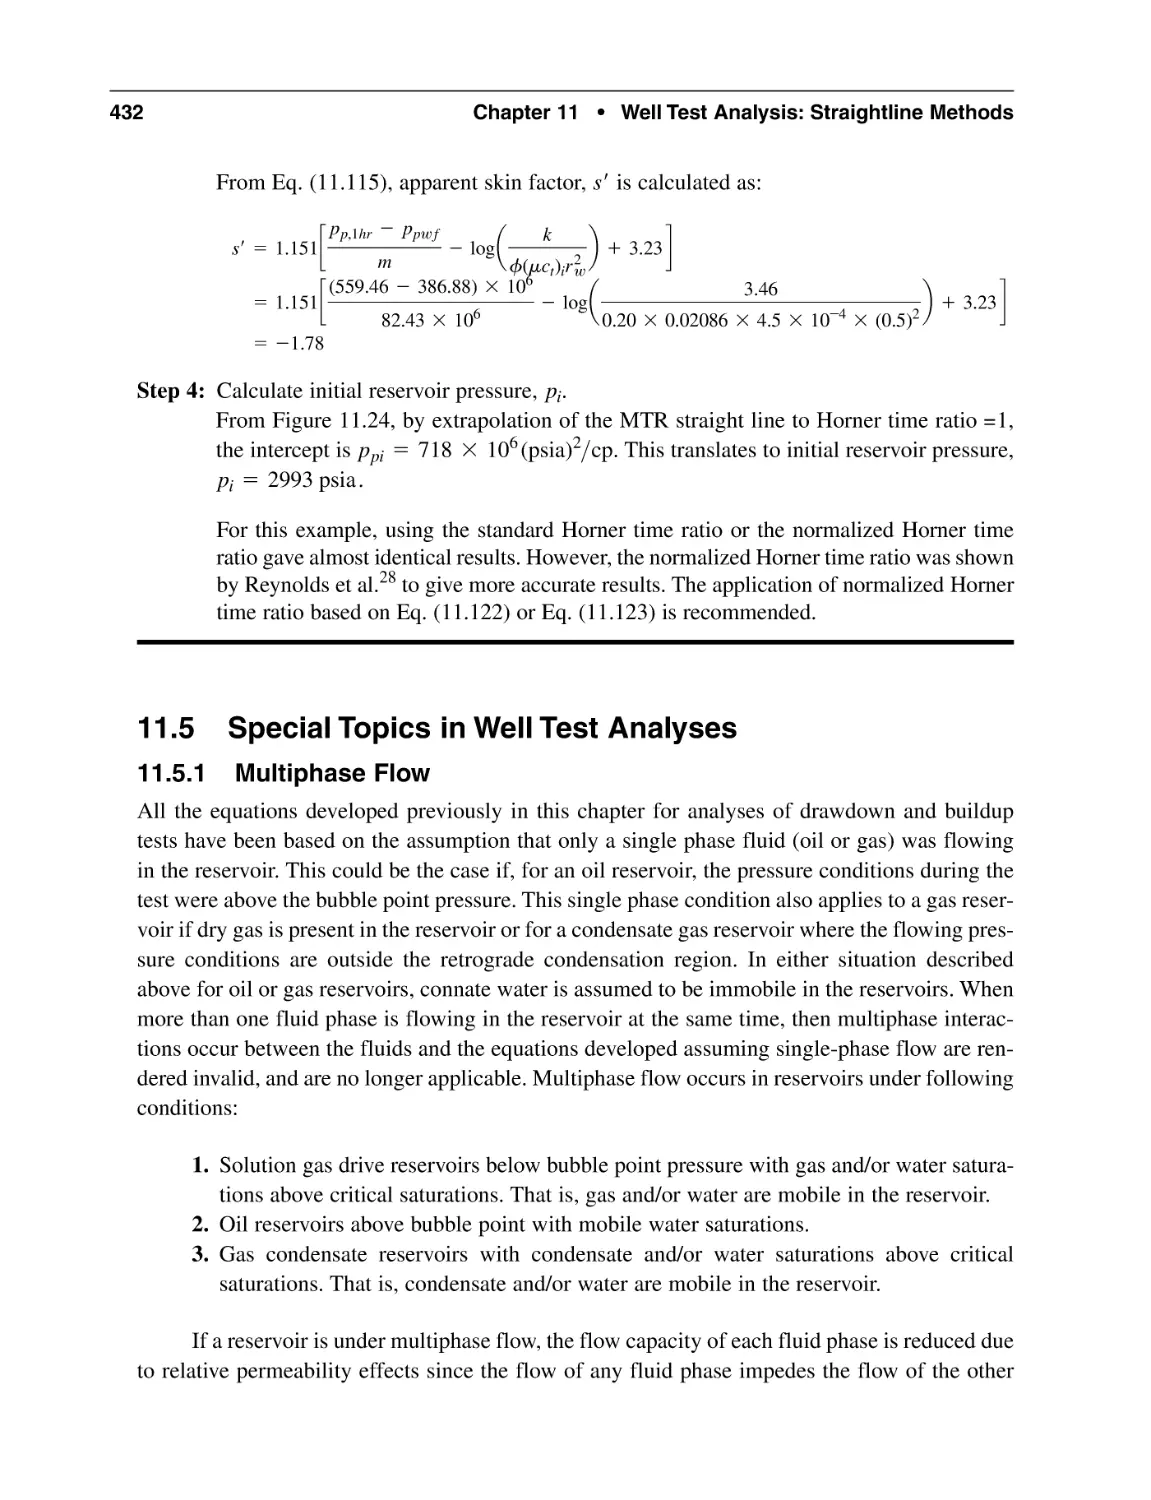 11.5 Special Topics in Well Test Analyses
11.5.1 Multiphase Flow